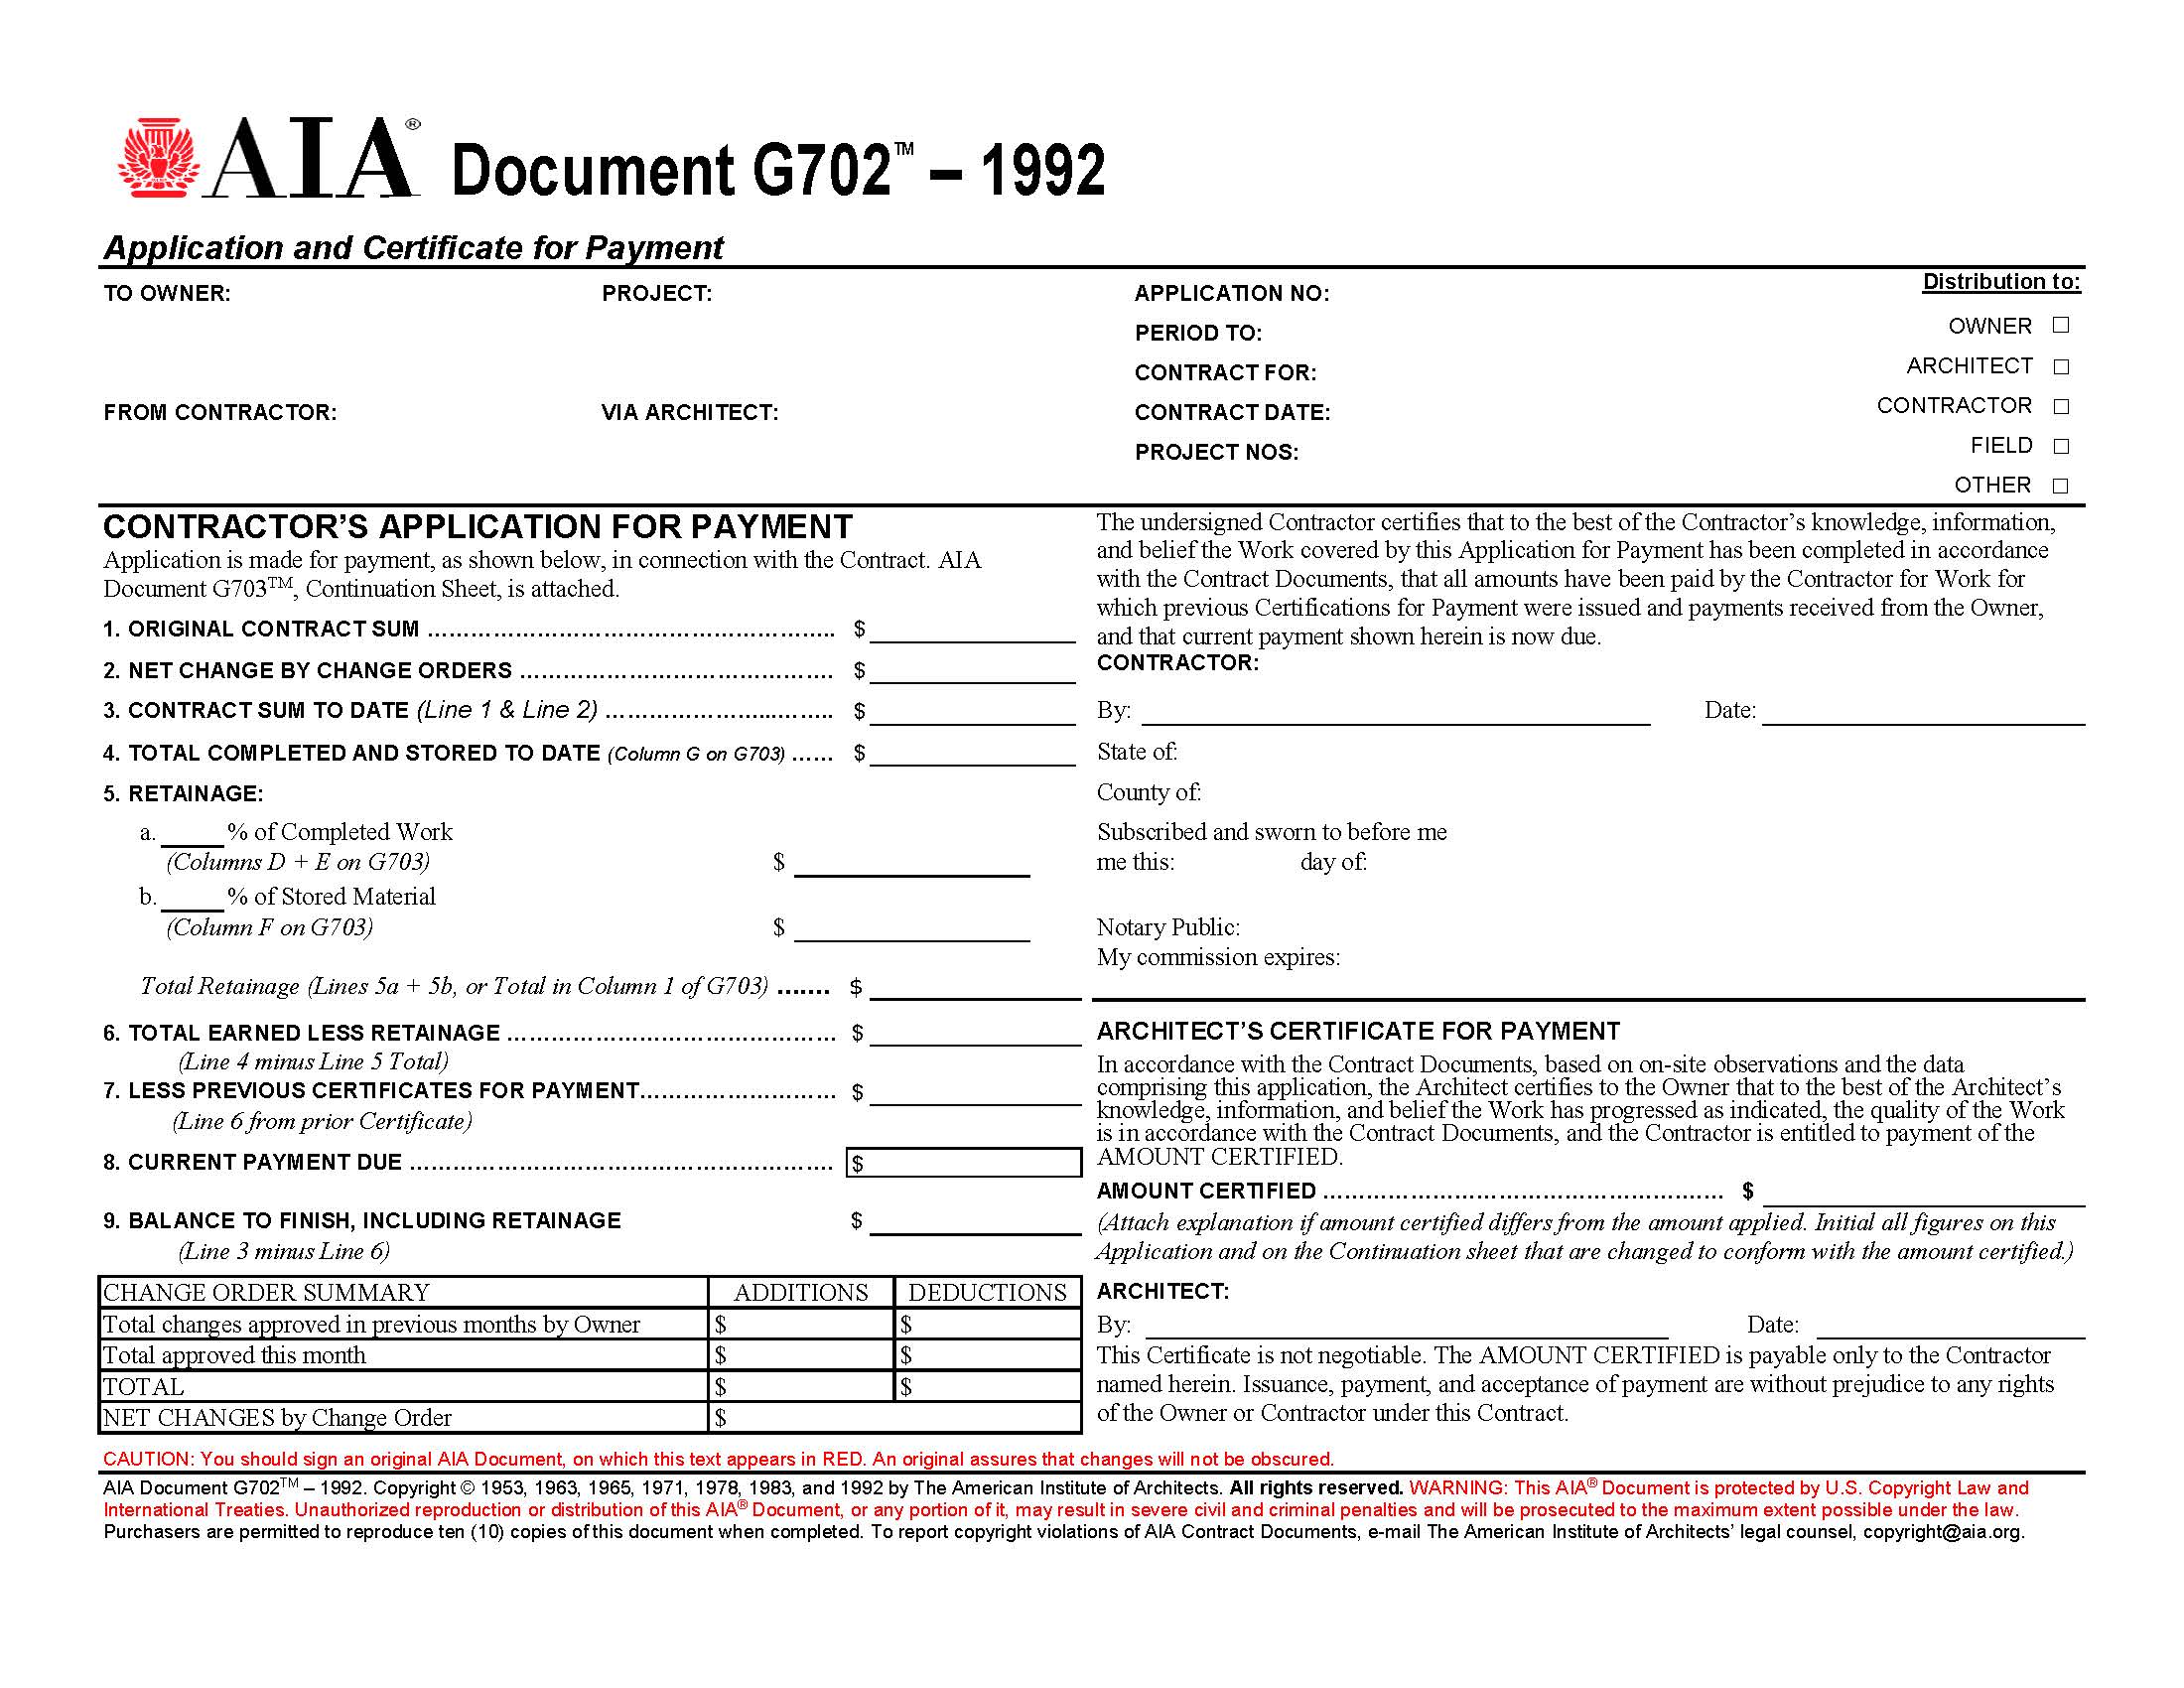 aia-forms-g702-g703-application-certificate-and-continuation